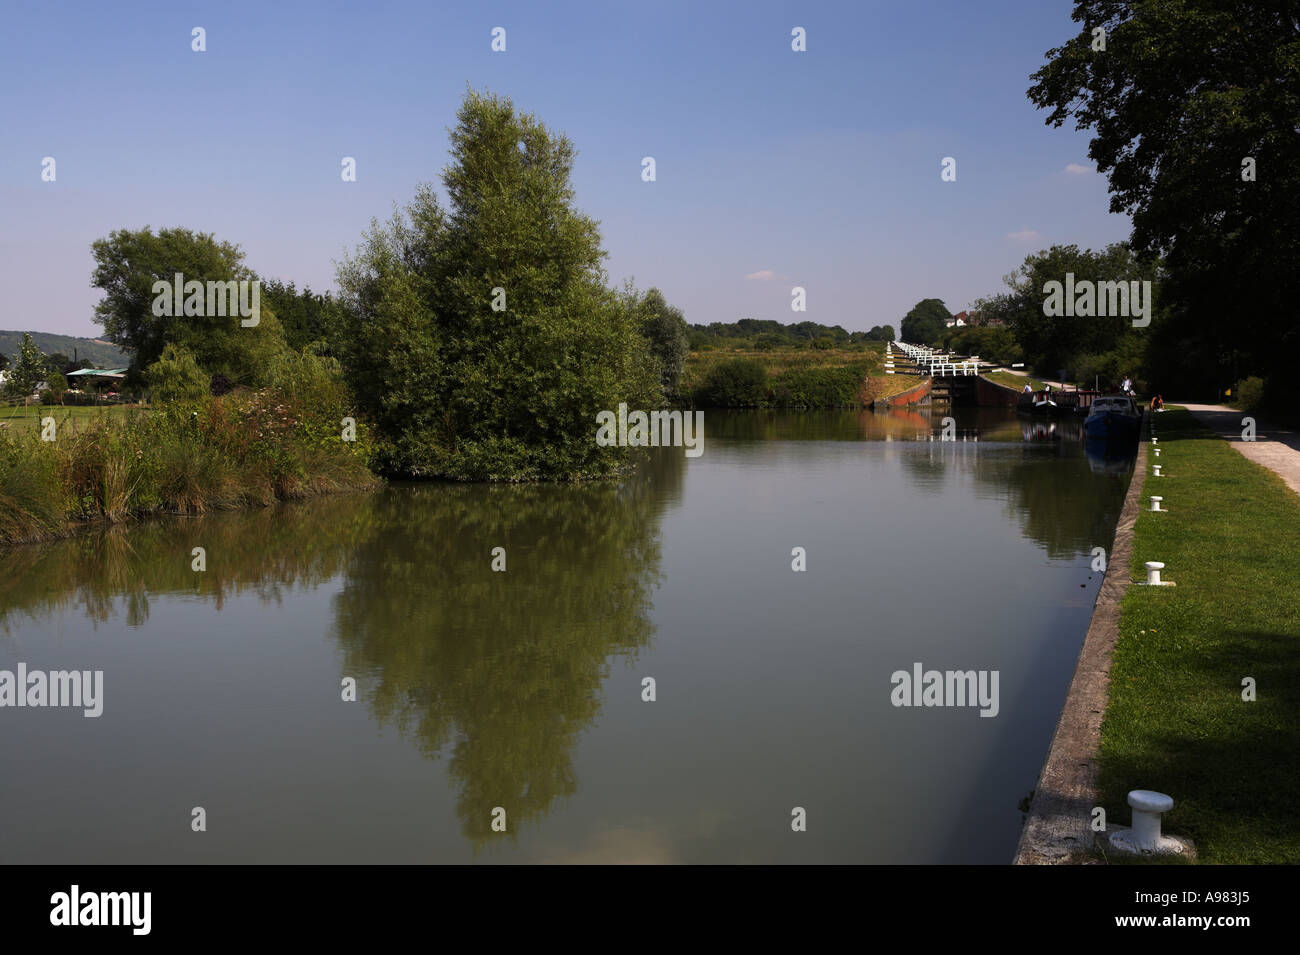 Caen Hill Vol, Kennet and Avon Canal, Devizes, Wiltshire, England, UK Banque D'Images